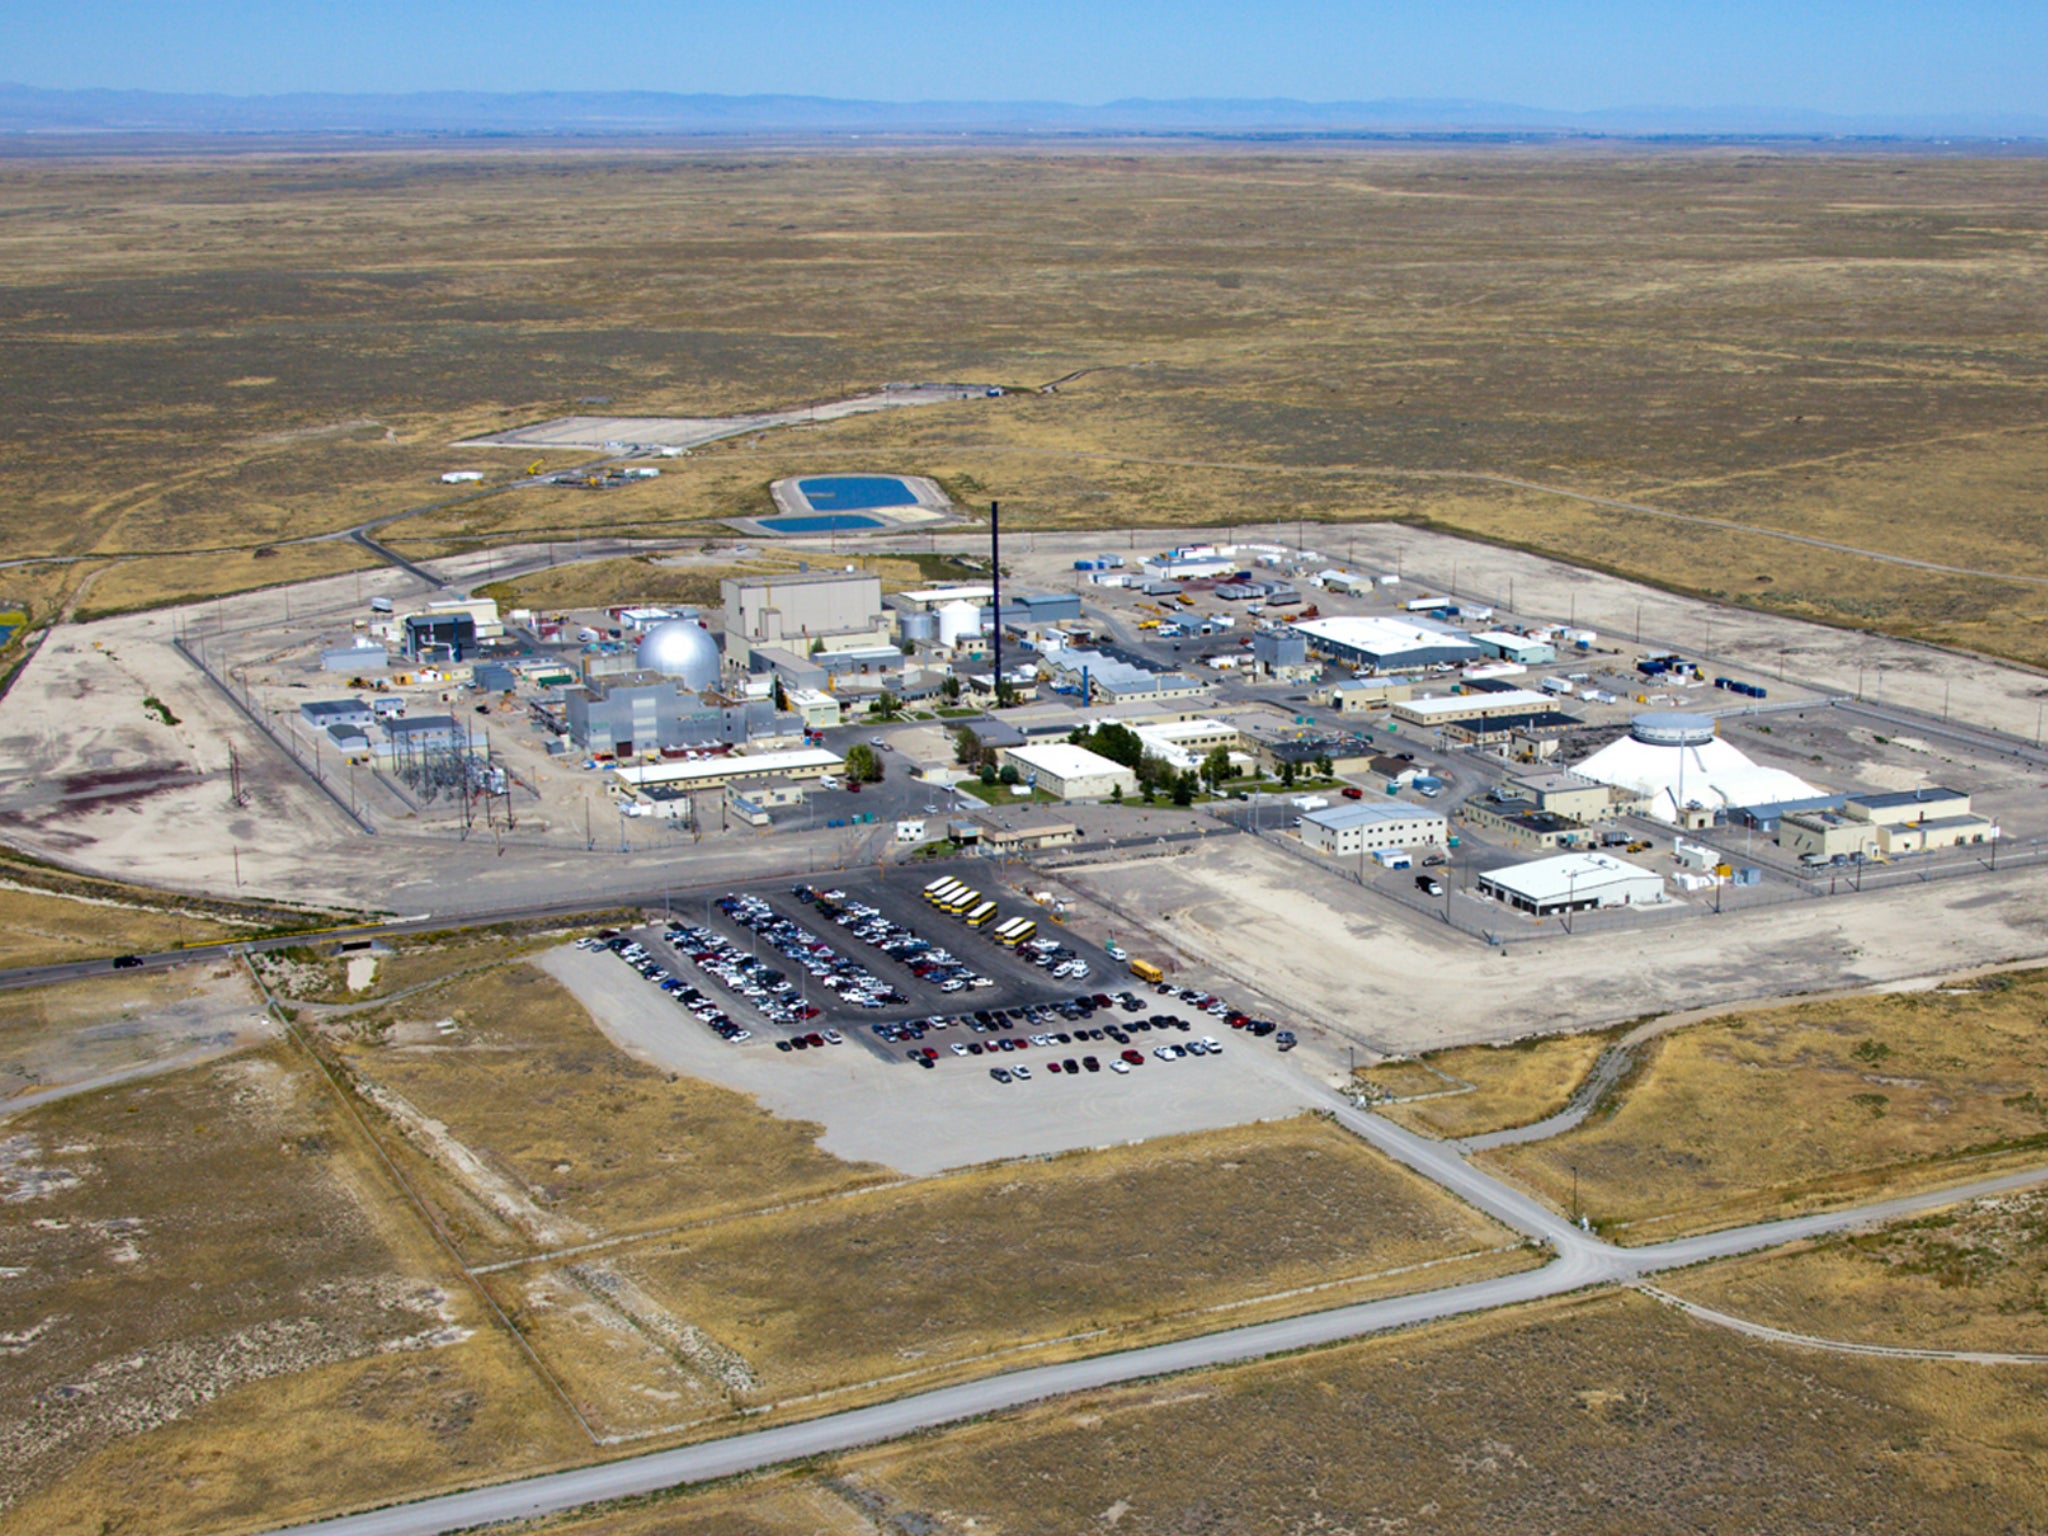 Employees of a contractor in charge of managing the Department of Energy's Idaho National Laboratory, where the US stockpile of nuclear materials is kept, had plutonium and radioactive cesium stolen from their vehicle in March 2017